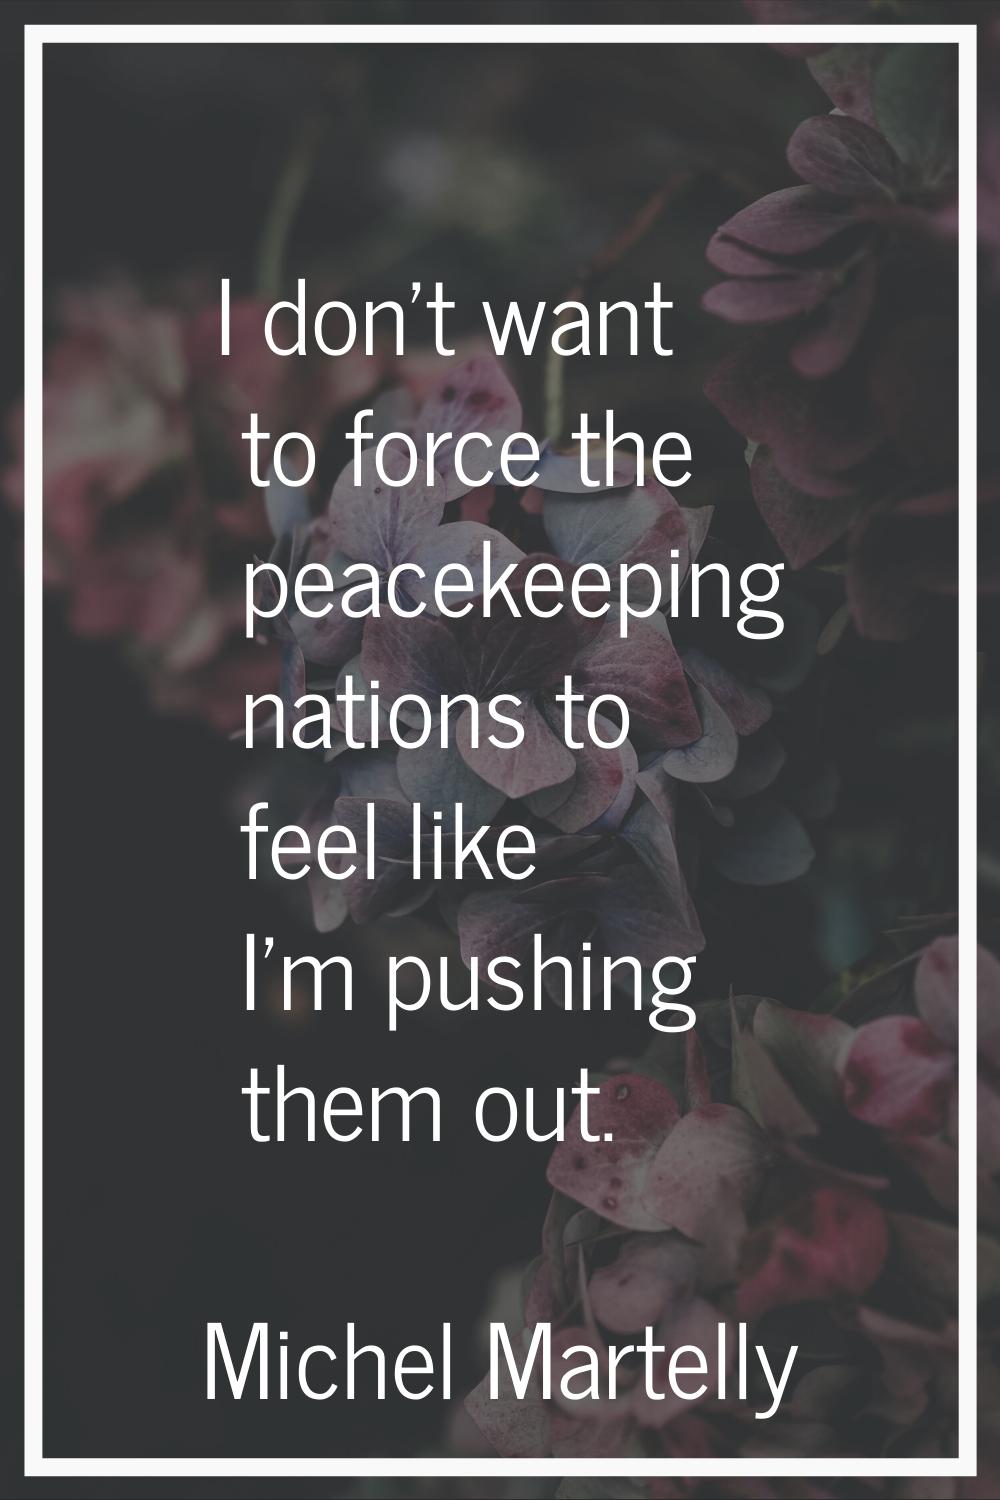 I don't want to force the peacekeeping nations to feel like I'm pushing them out.